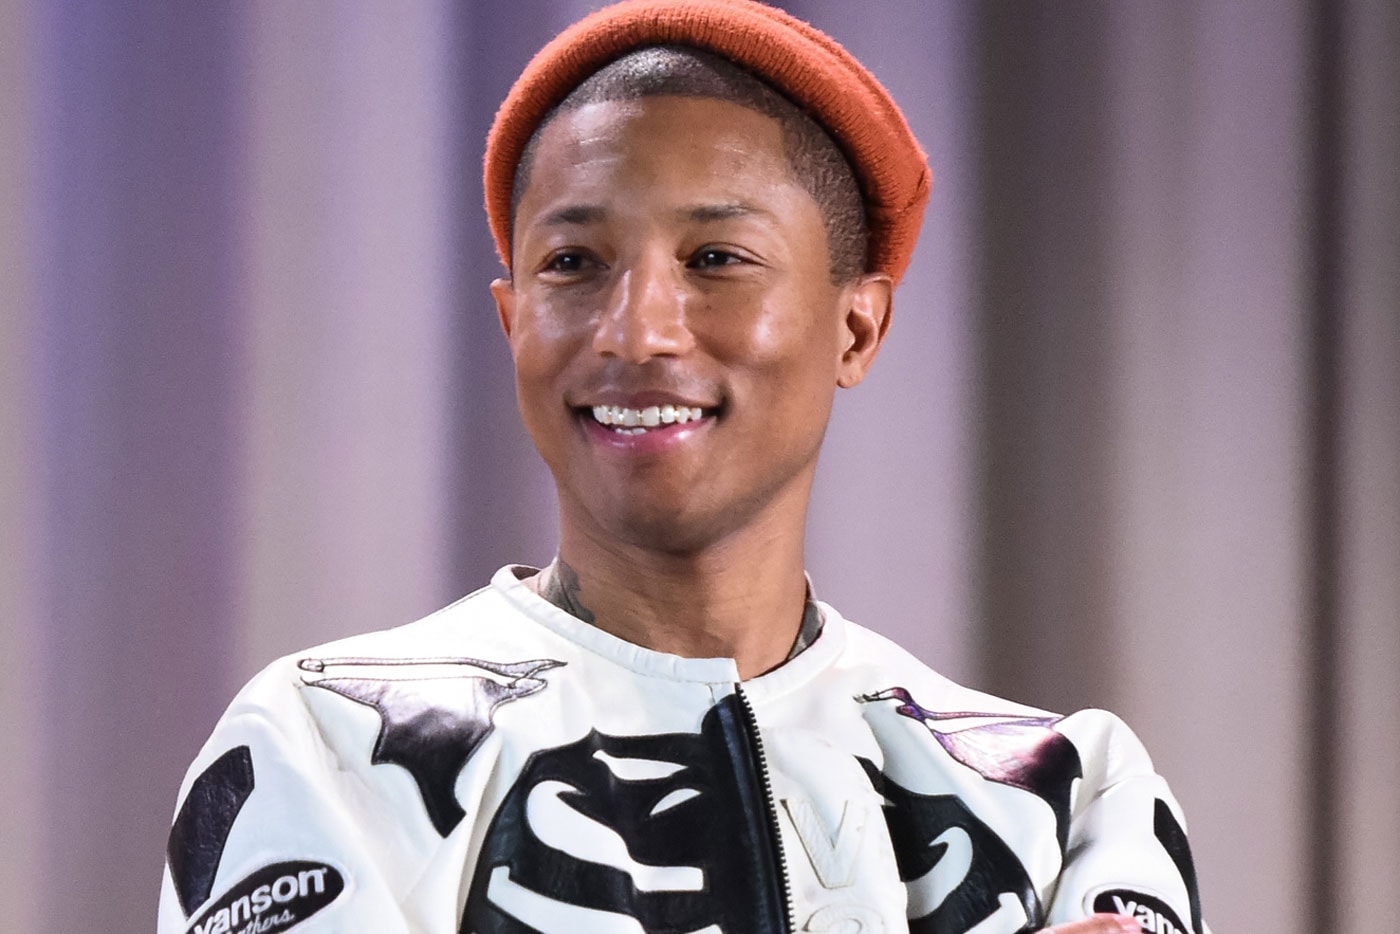 Pharrell Partnering With Dean & Deluca for Gourmet Food Line